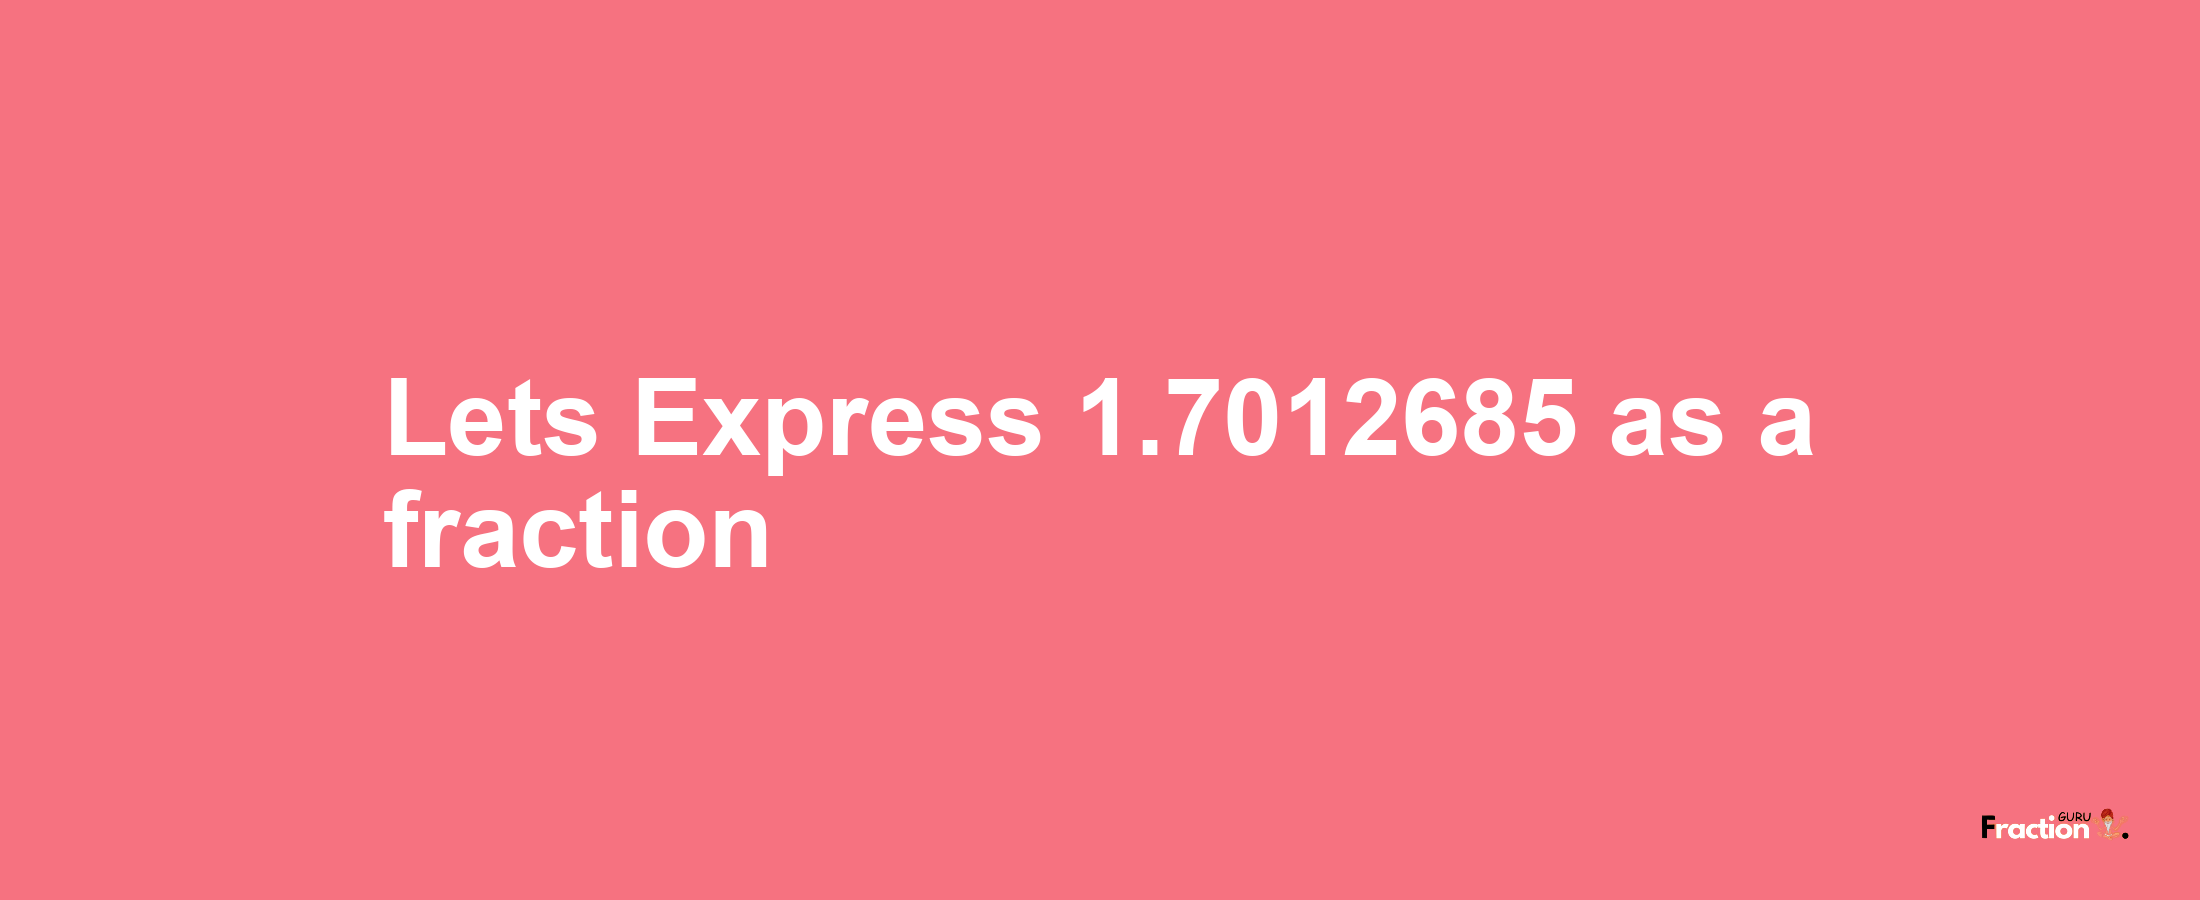 Lets Express 1.7012685 as afraction